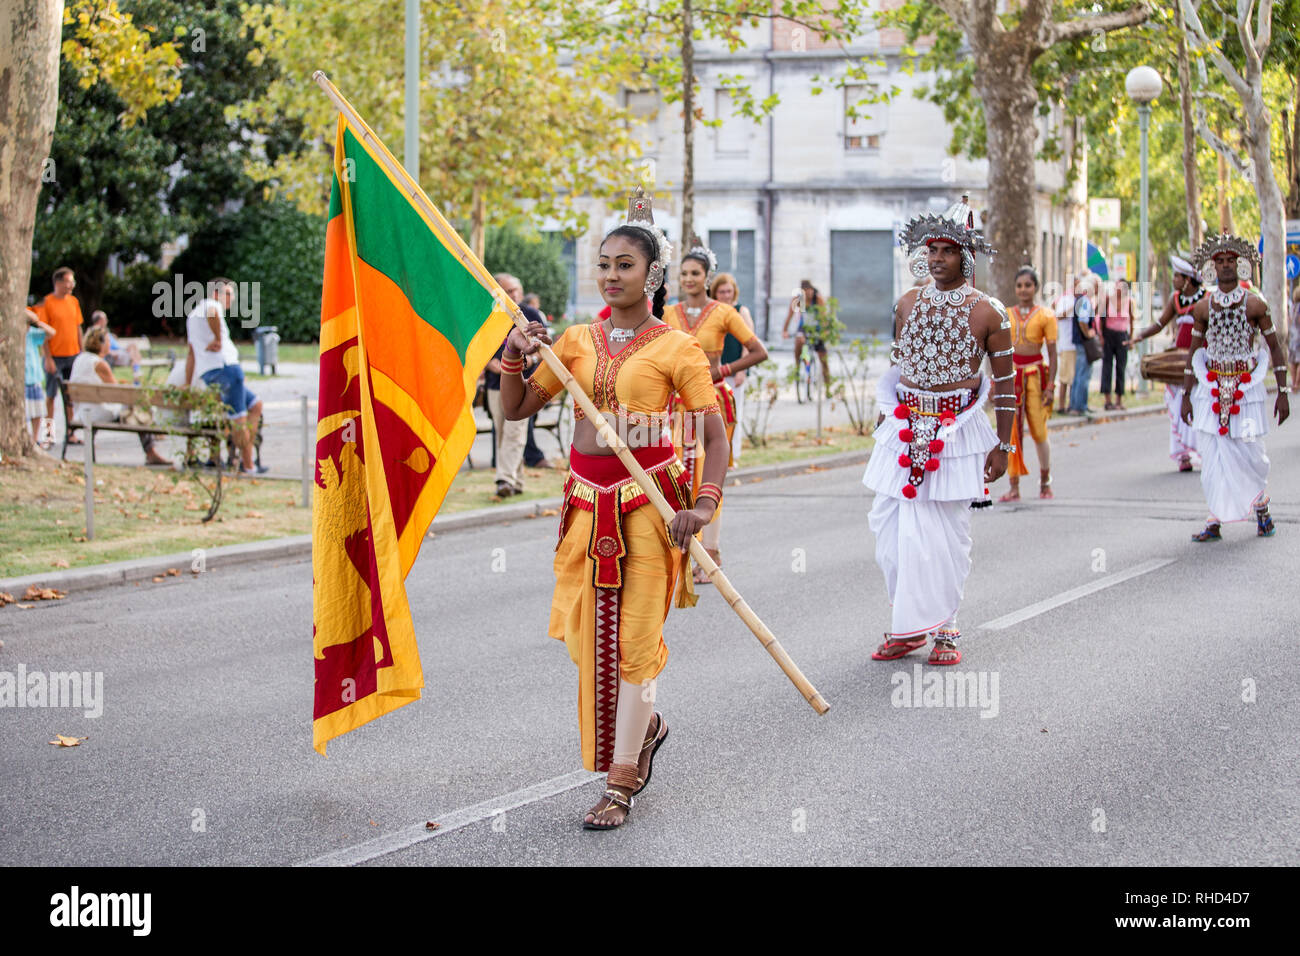 Gorizia, Italy - August 27, 2017: Dancers of Sri Lanka traditional dance company on the town street during the International Folklore Festival Stock Photo